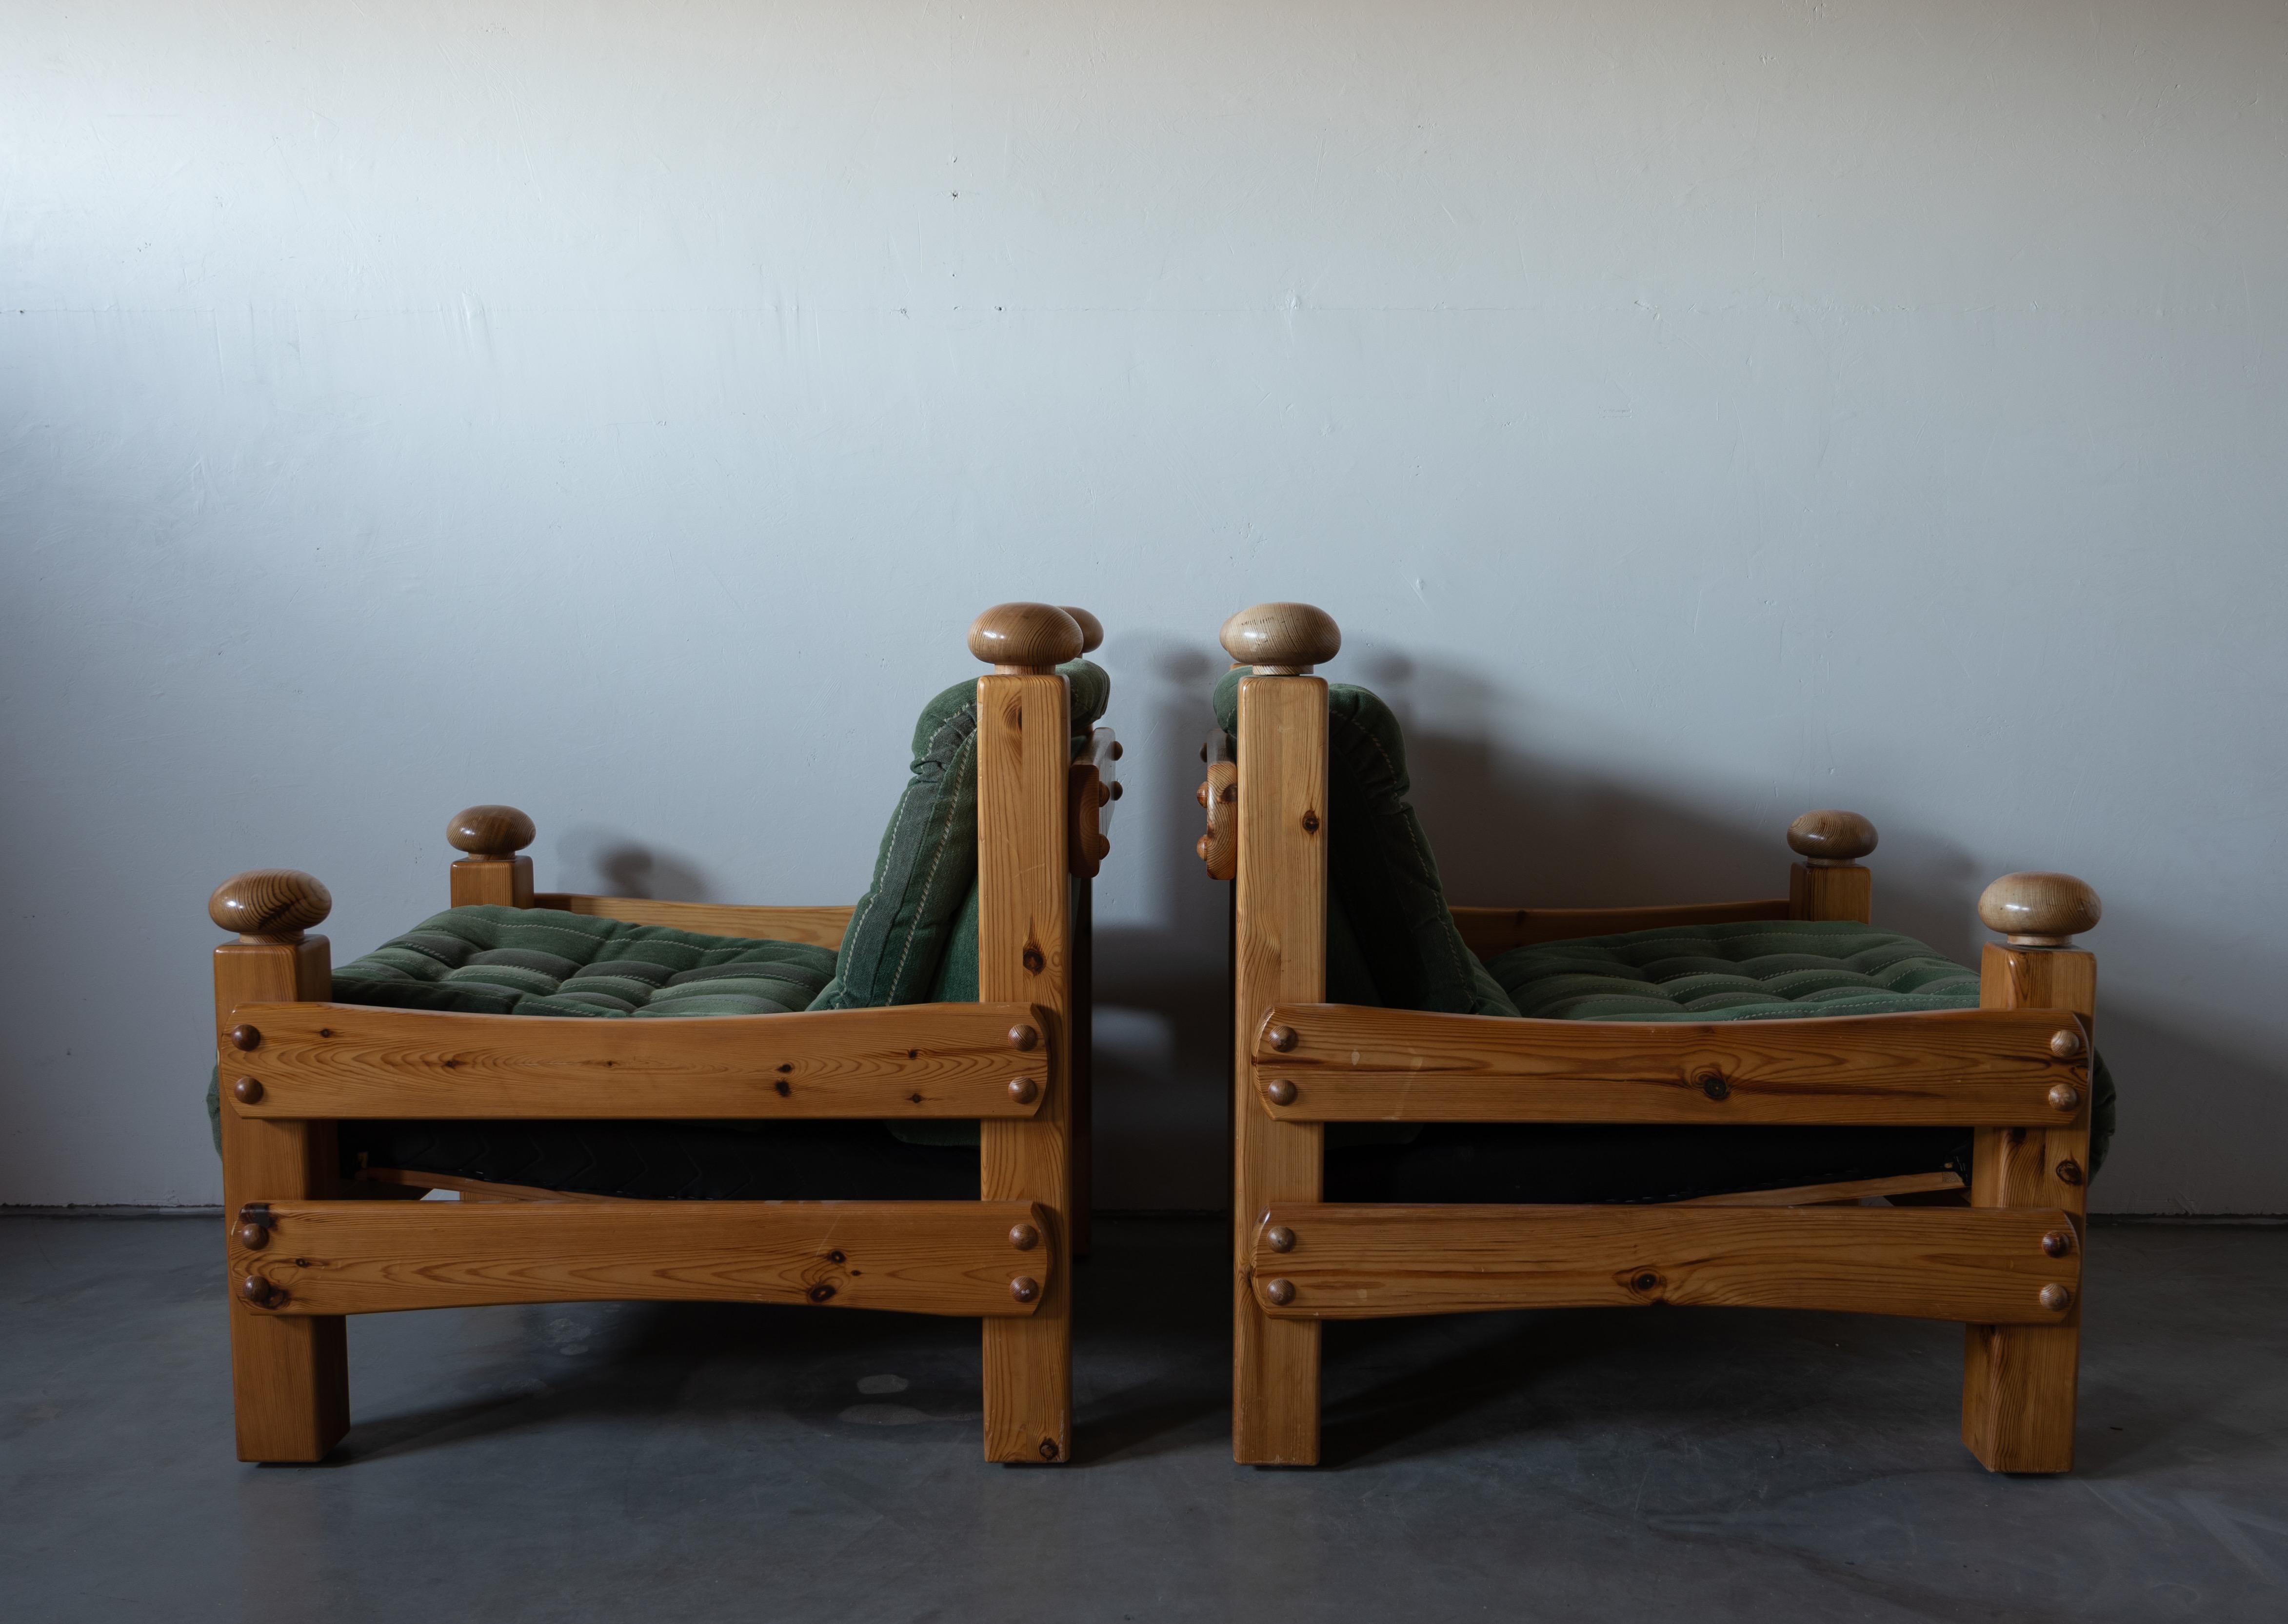 Swedish Designer, Lounge Chairs, Solid Pine, Green Fabric, Sweden, 1970s For Sale 7